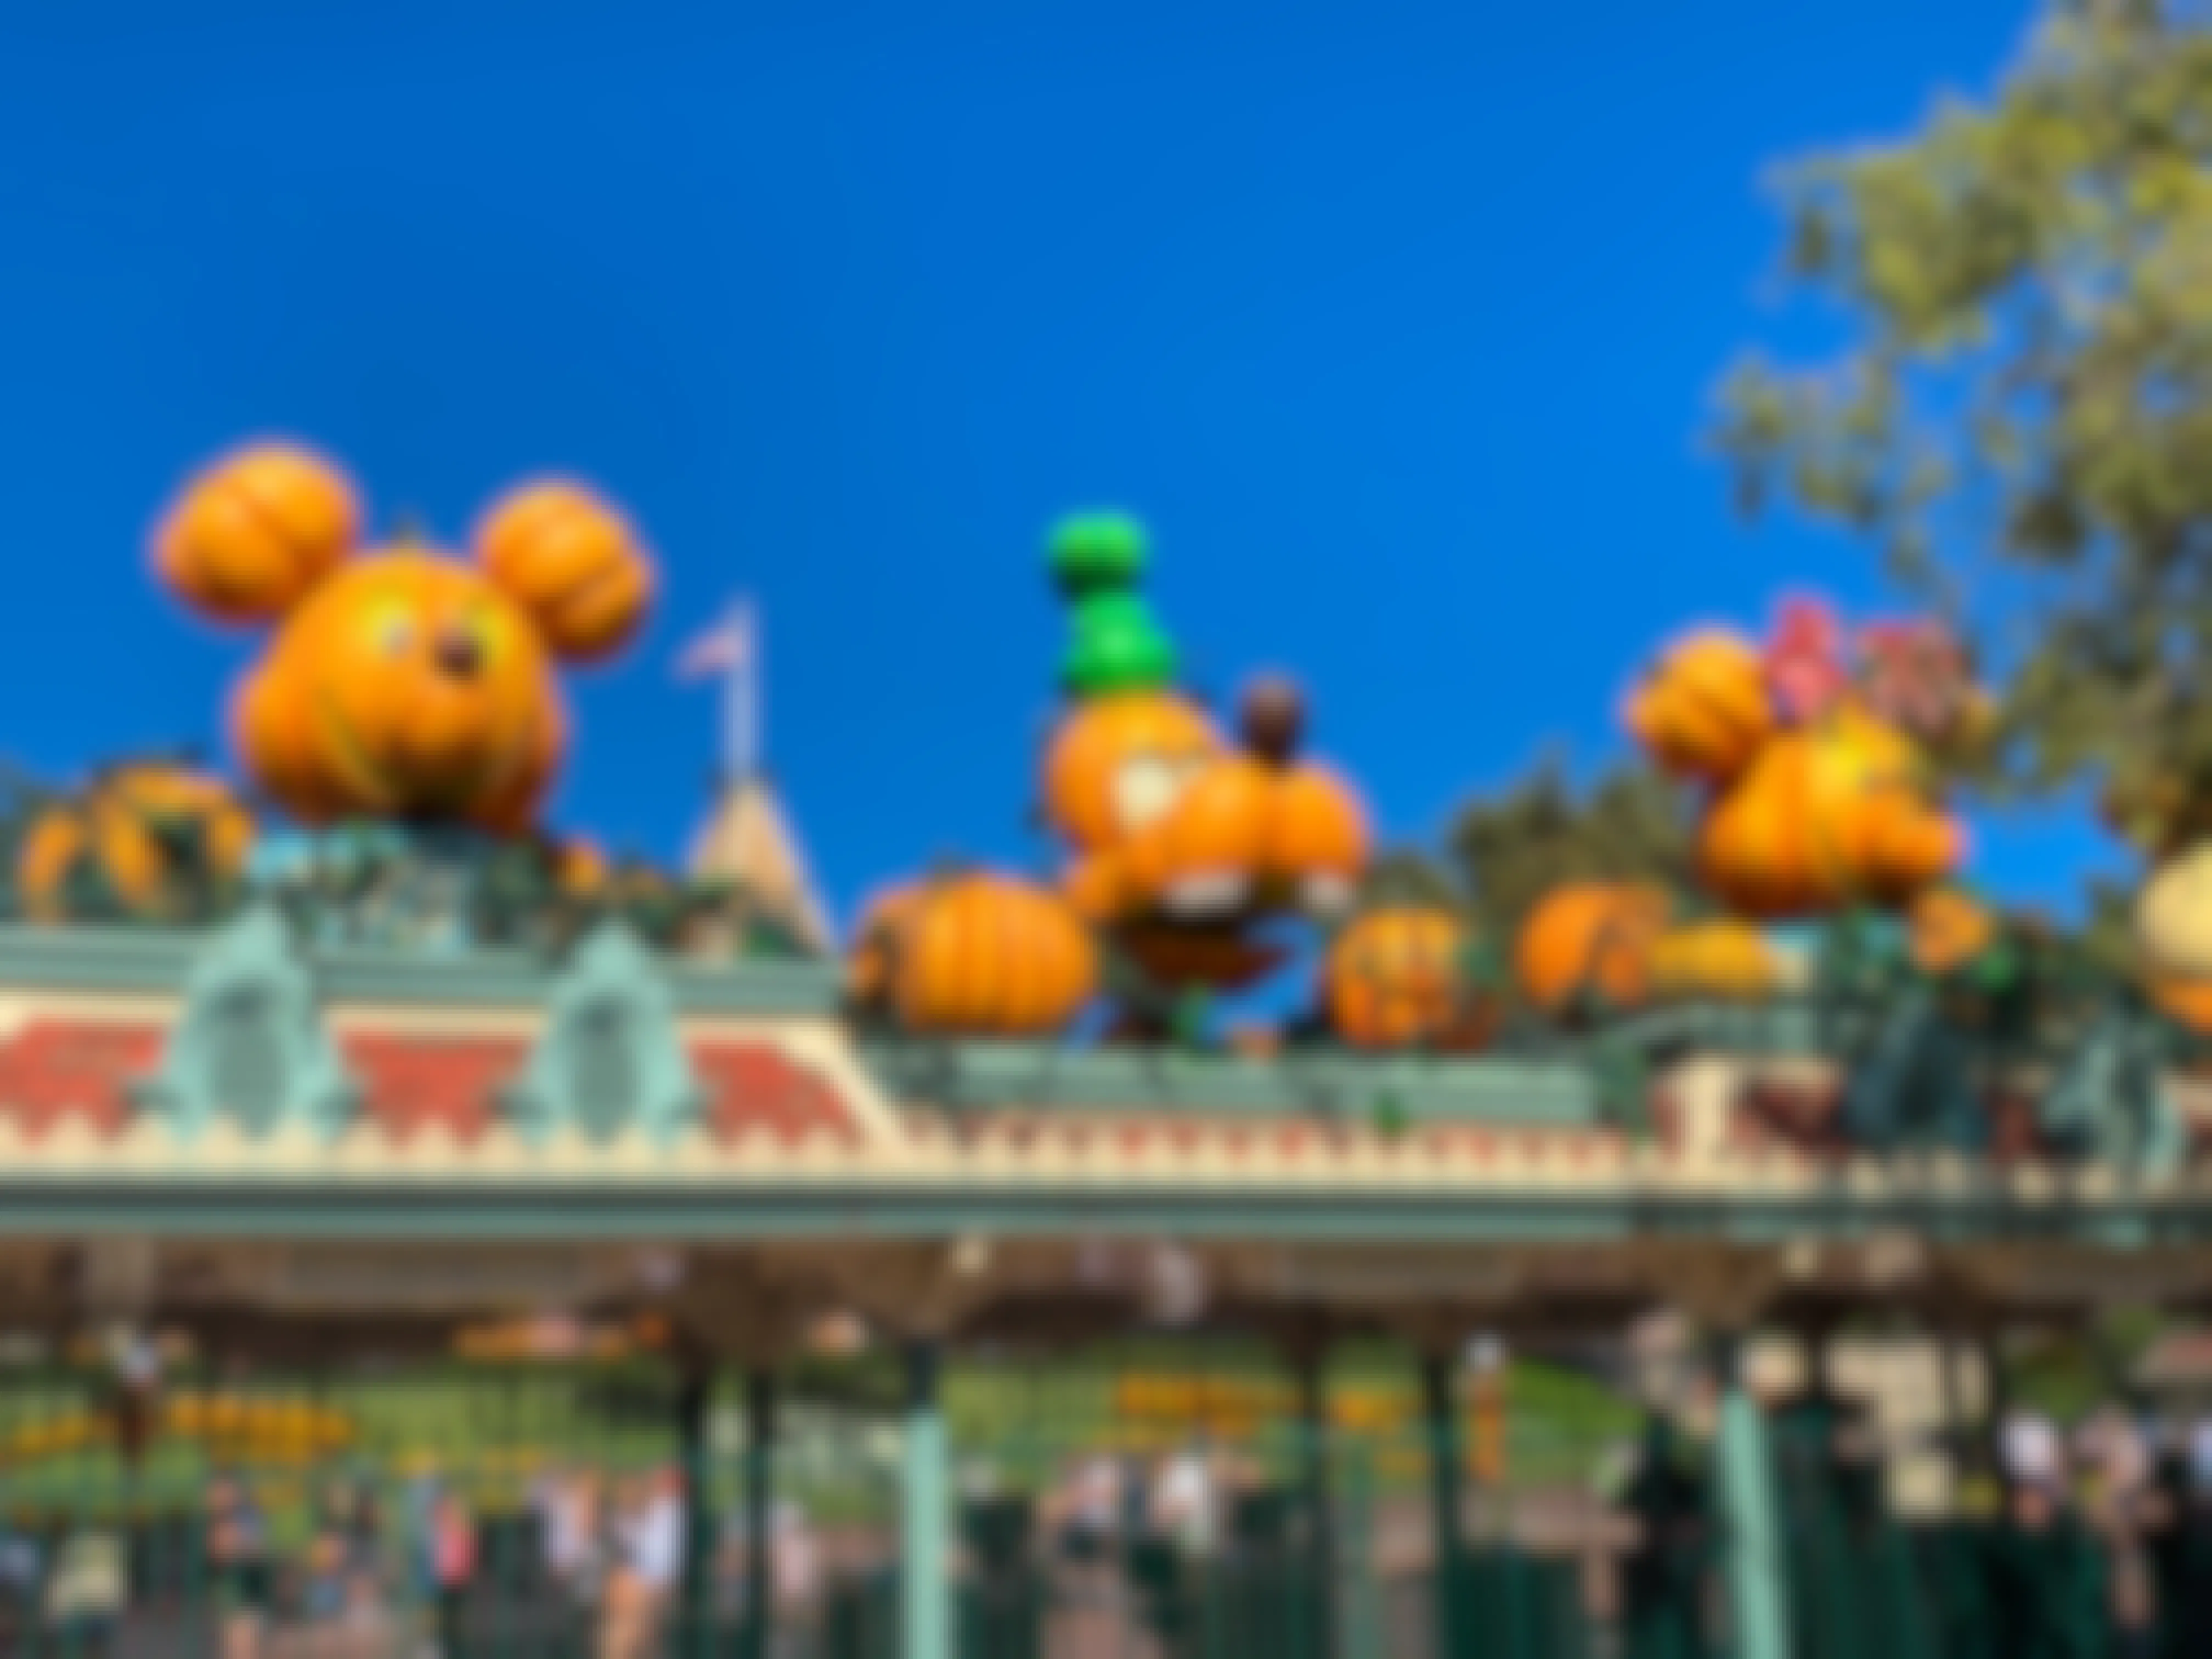 A Disney park with Halloween pumpkins made to look like Mickey, Minnie, and Goofy, over the entrance.